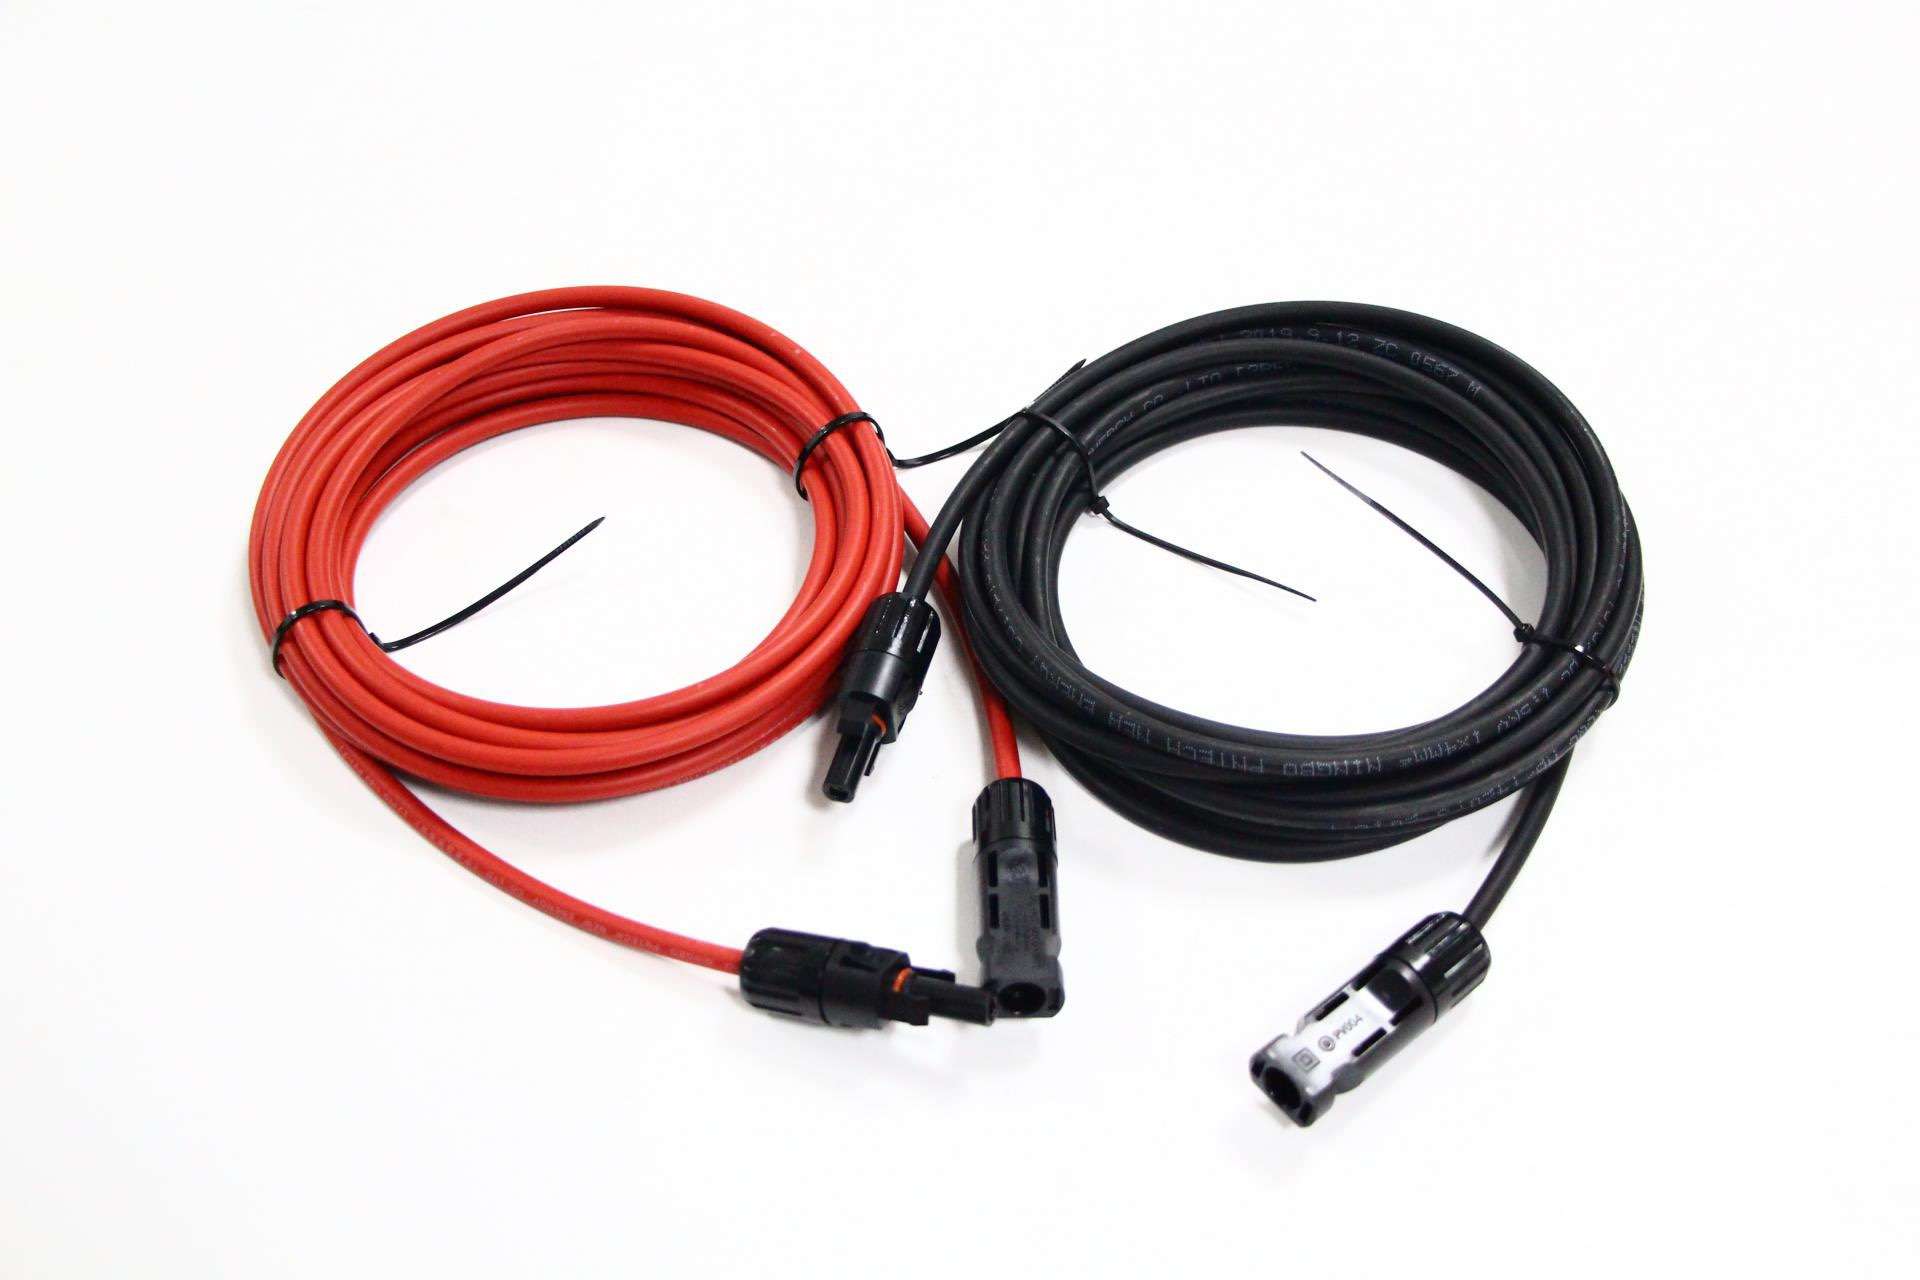 4MM 6MM MC4 Solar Extension Cord with Connectors